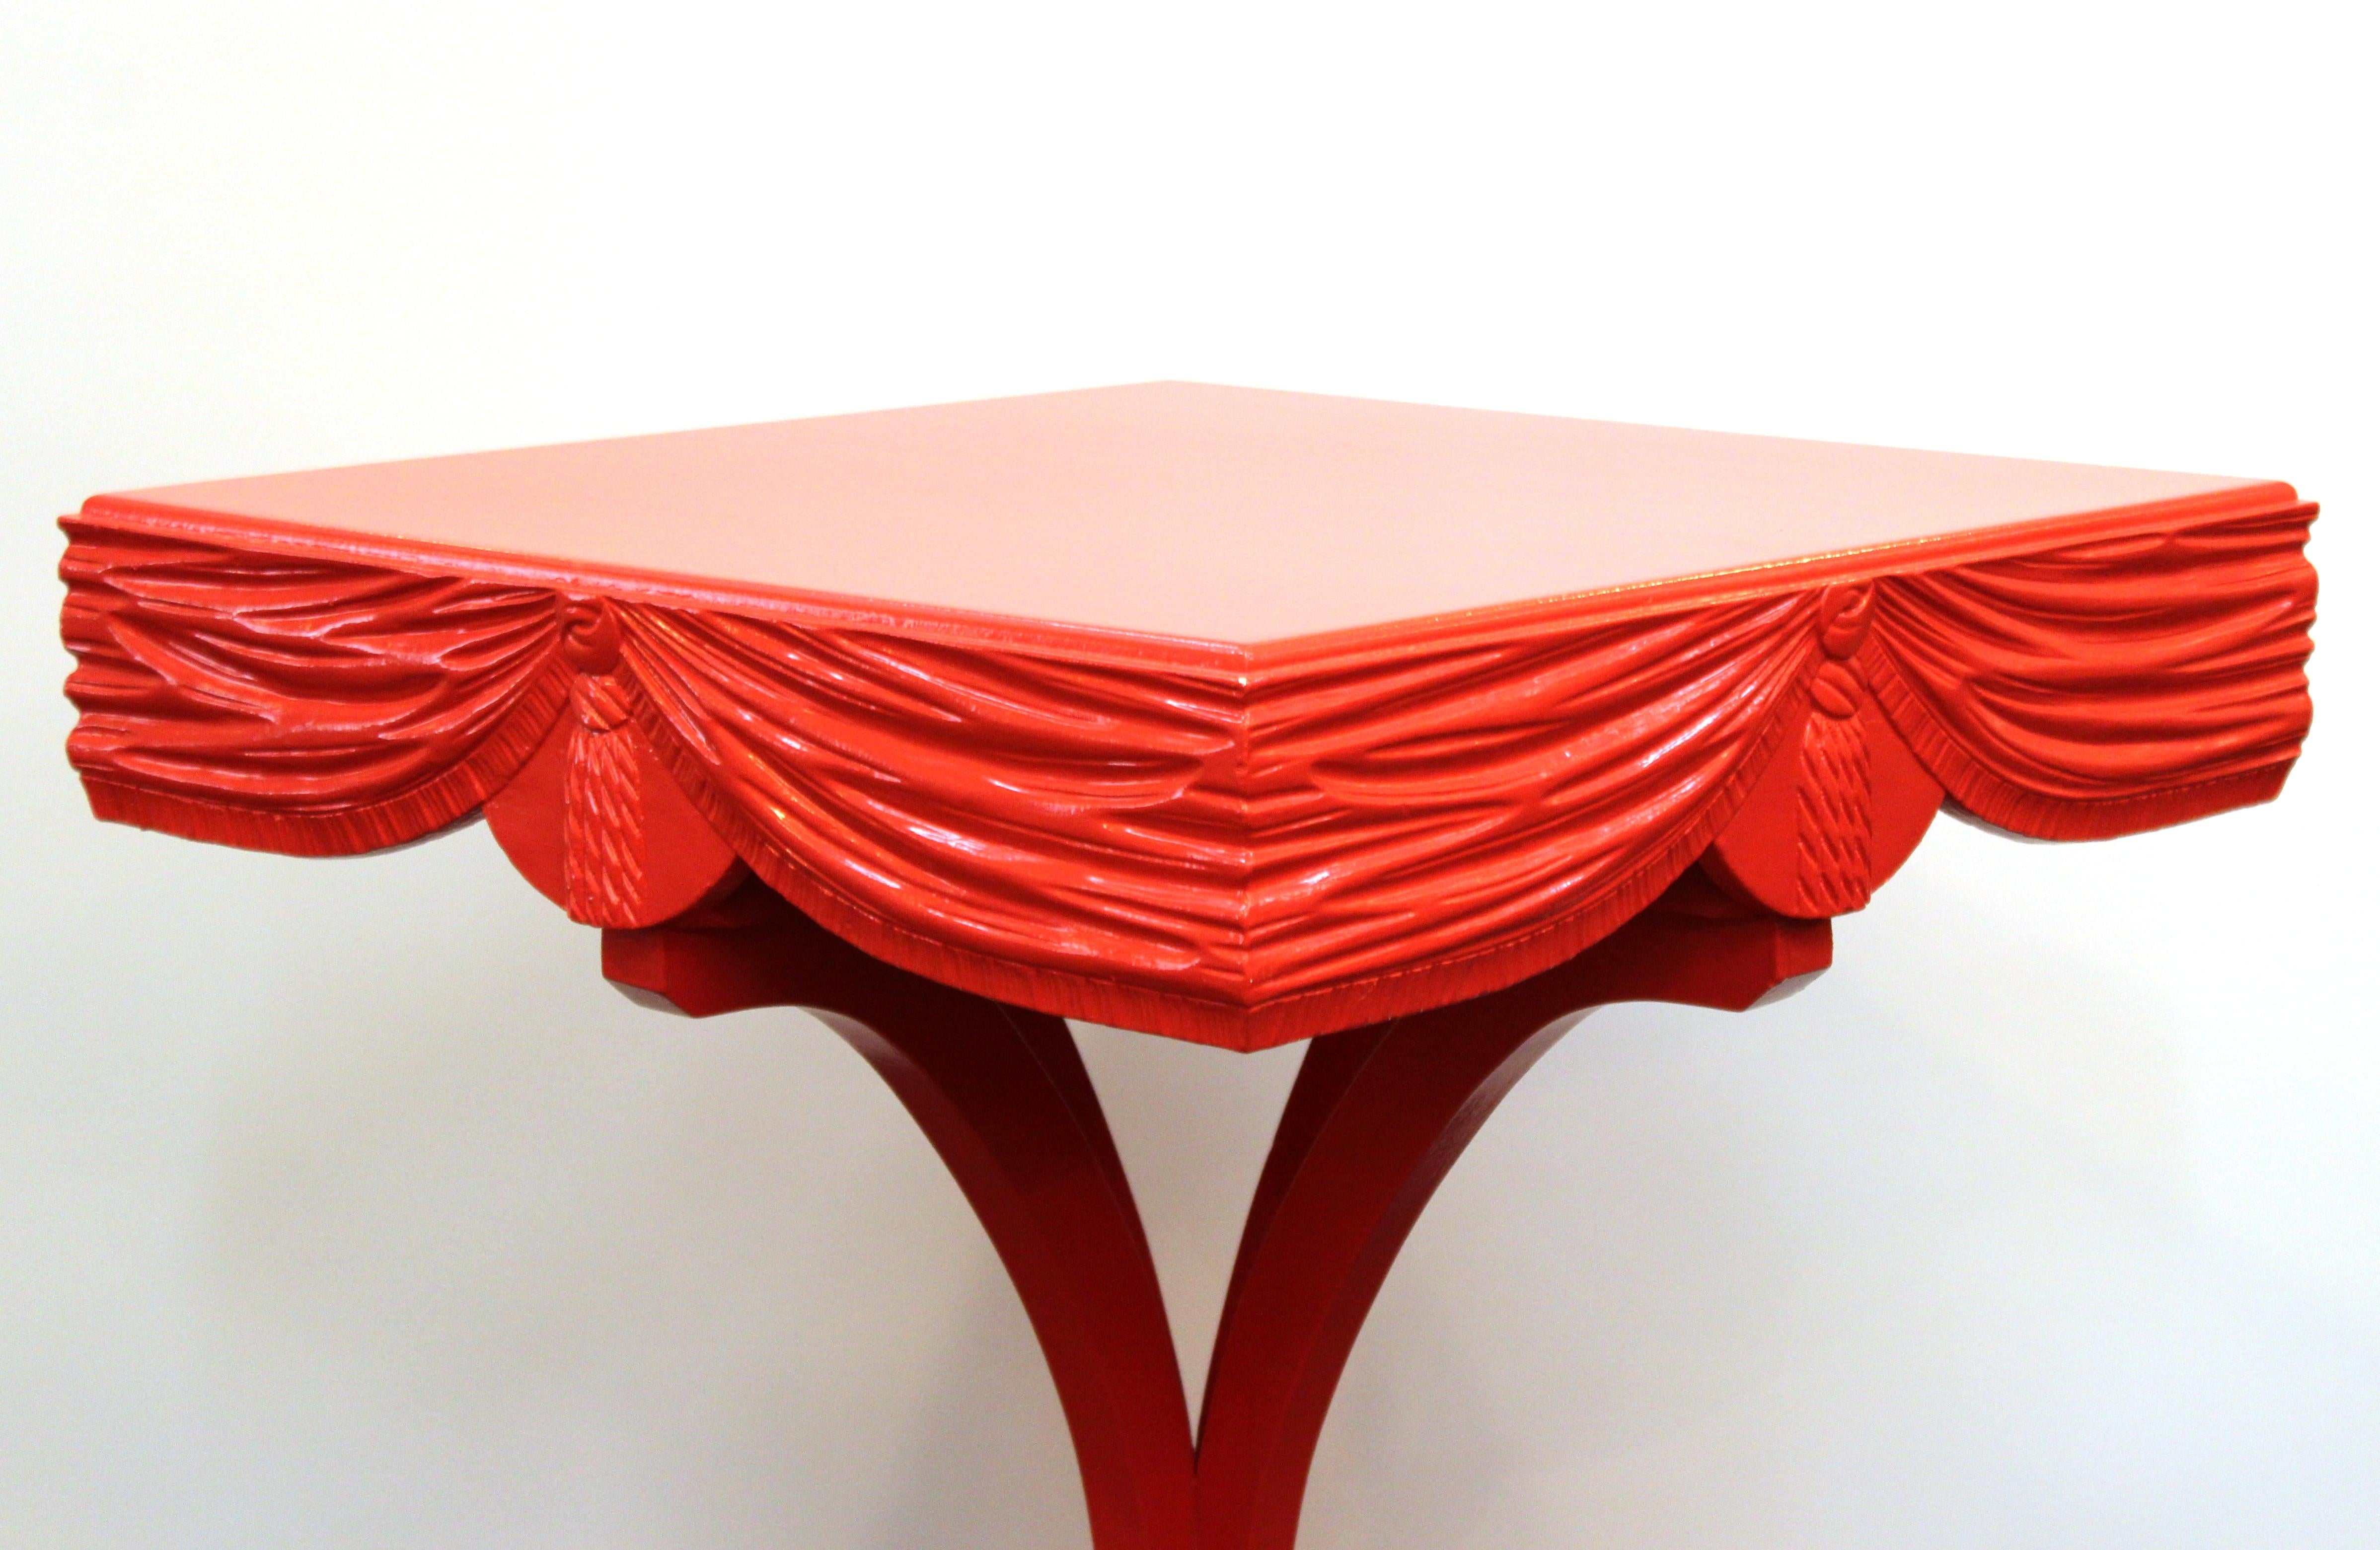 Hollywood Regency Red Side Tables with Sculpted Wood Drapery (20. Jahrhundert)